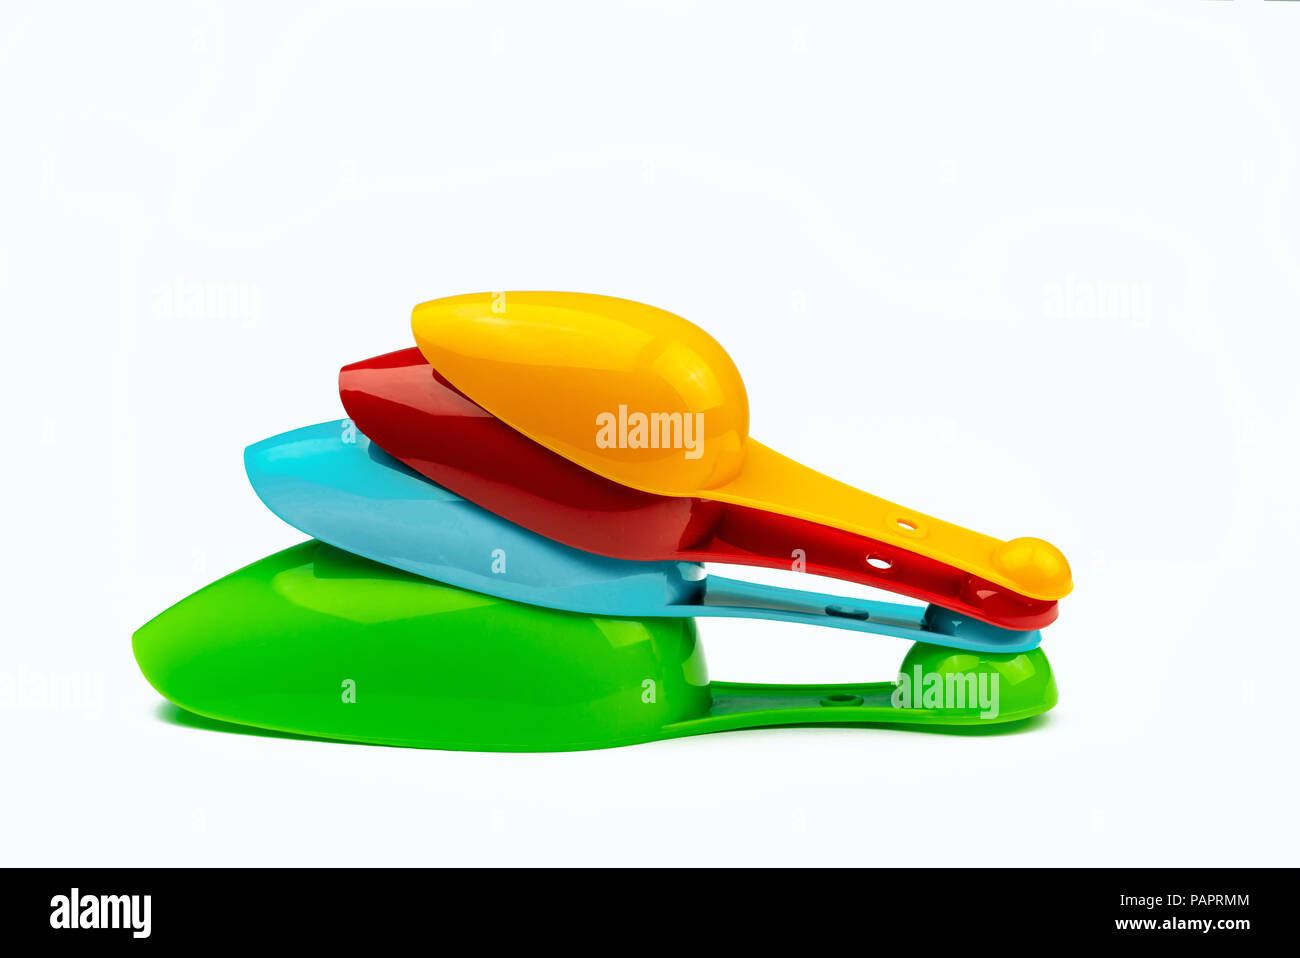 Set of Colorful Measuring Cups and Measuring Spoons Use in Cooking. Stock  Image - Image of object, spoons: 179802669